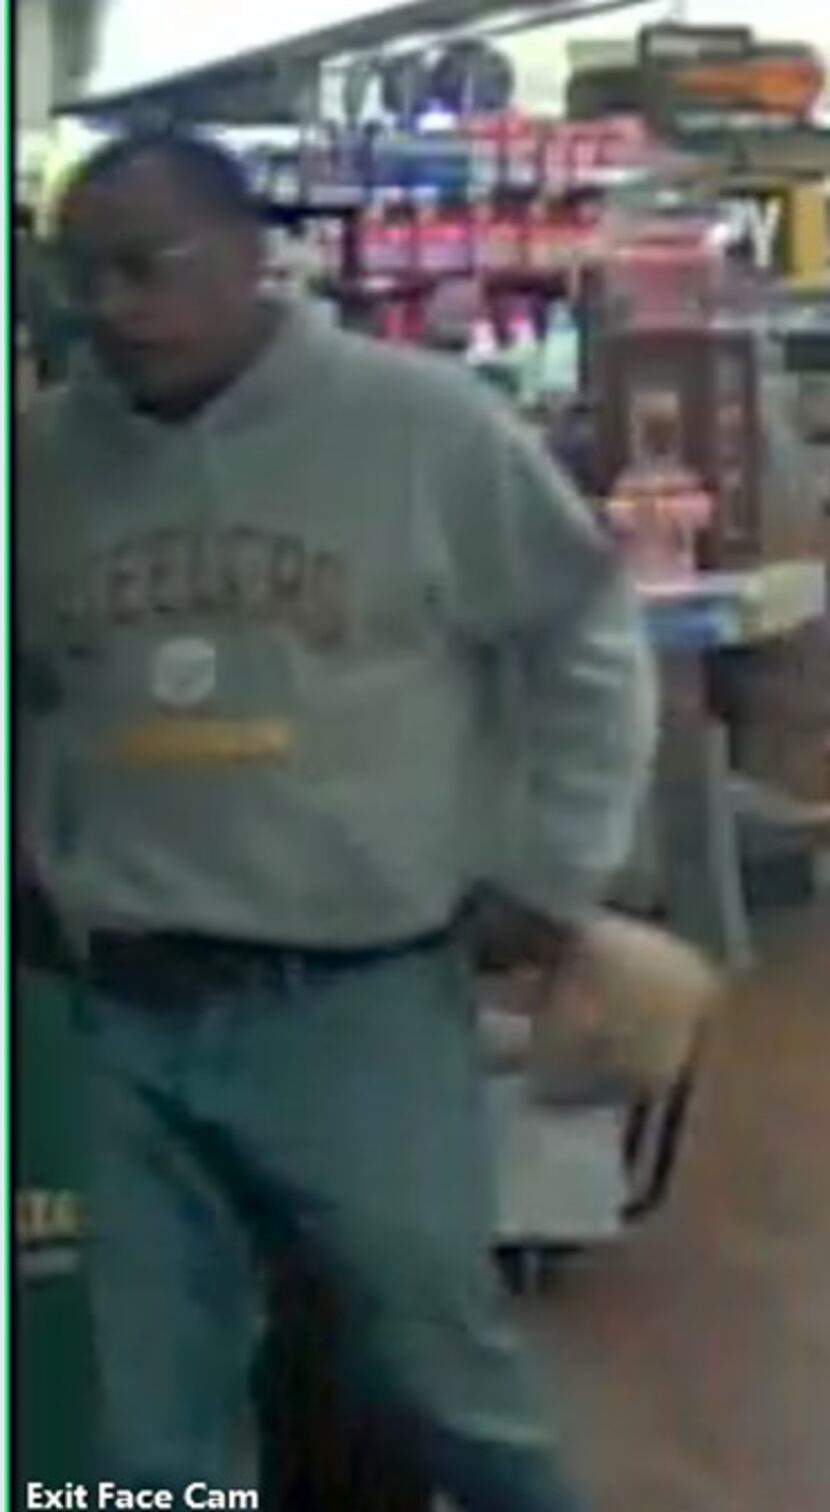 Surveillance camera captured footage of a man suspected in the sexual assault that occurred...